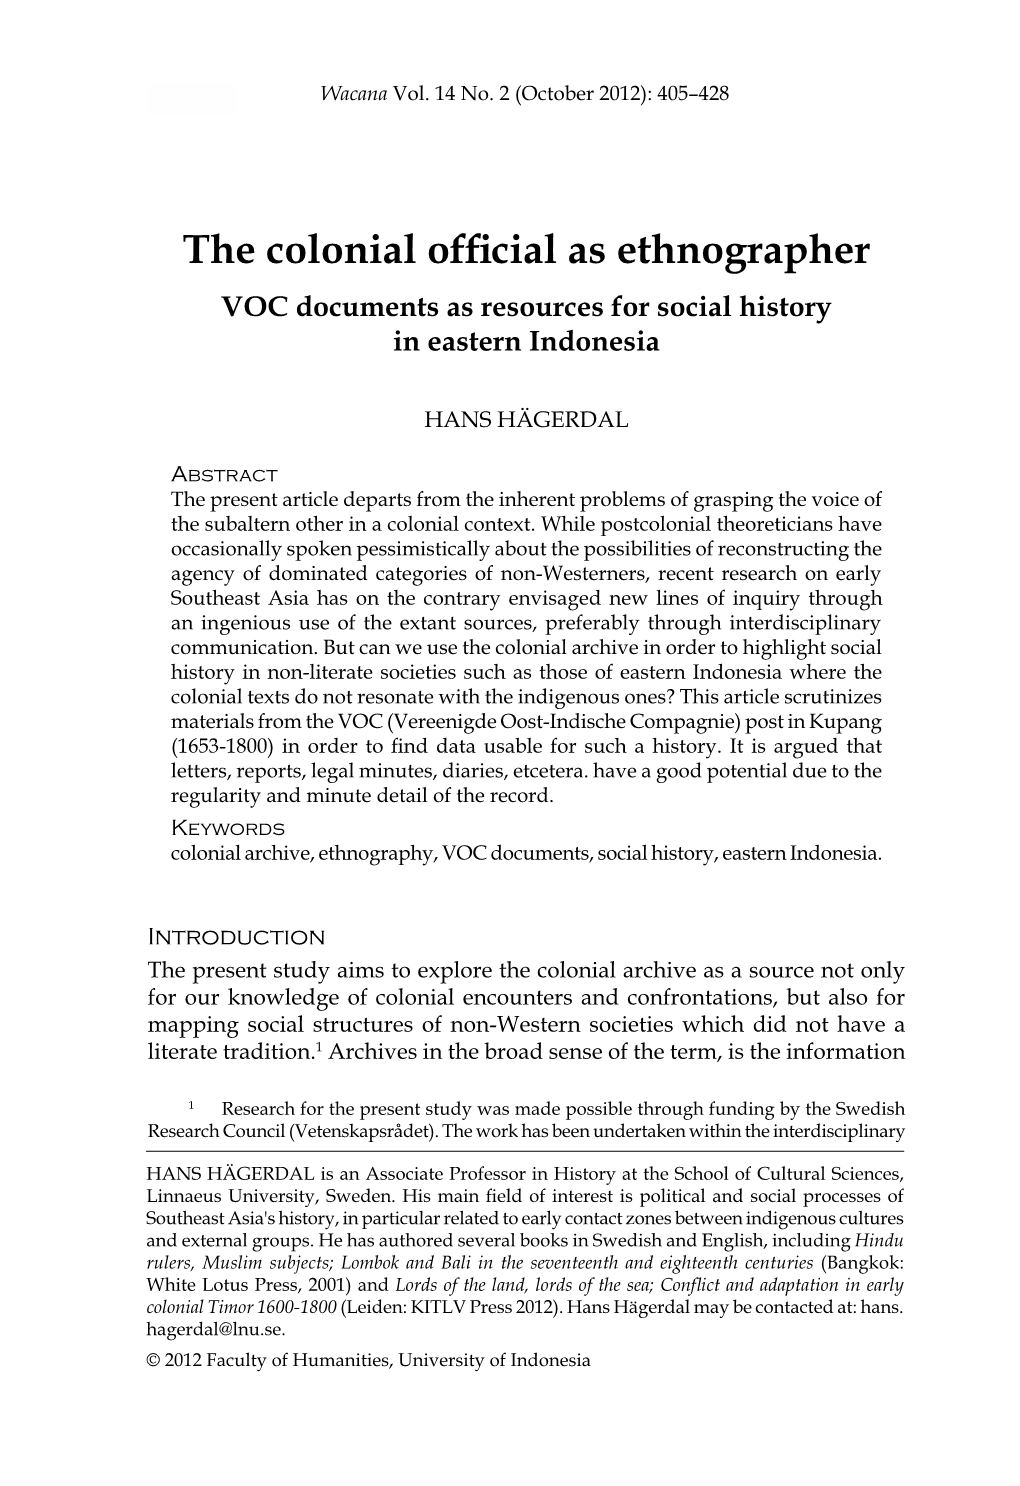 The Colonial Official As Ethnographer VOC Documents As Resources for Social History in Eastern Indonesia